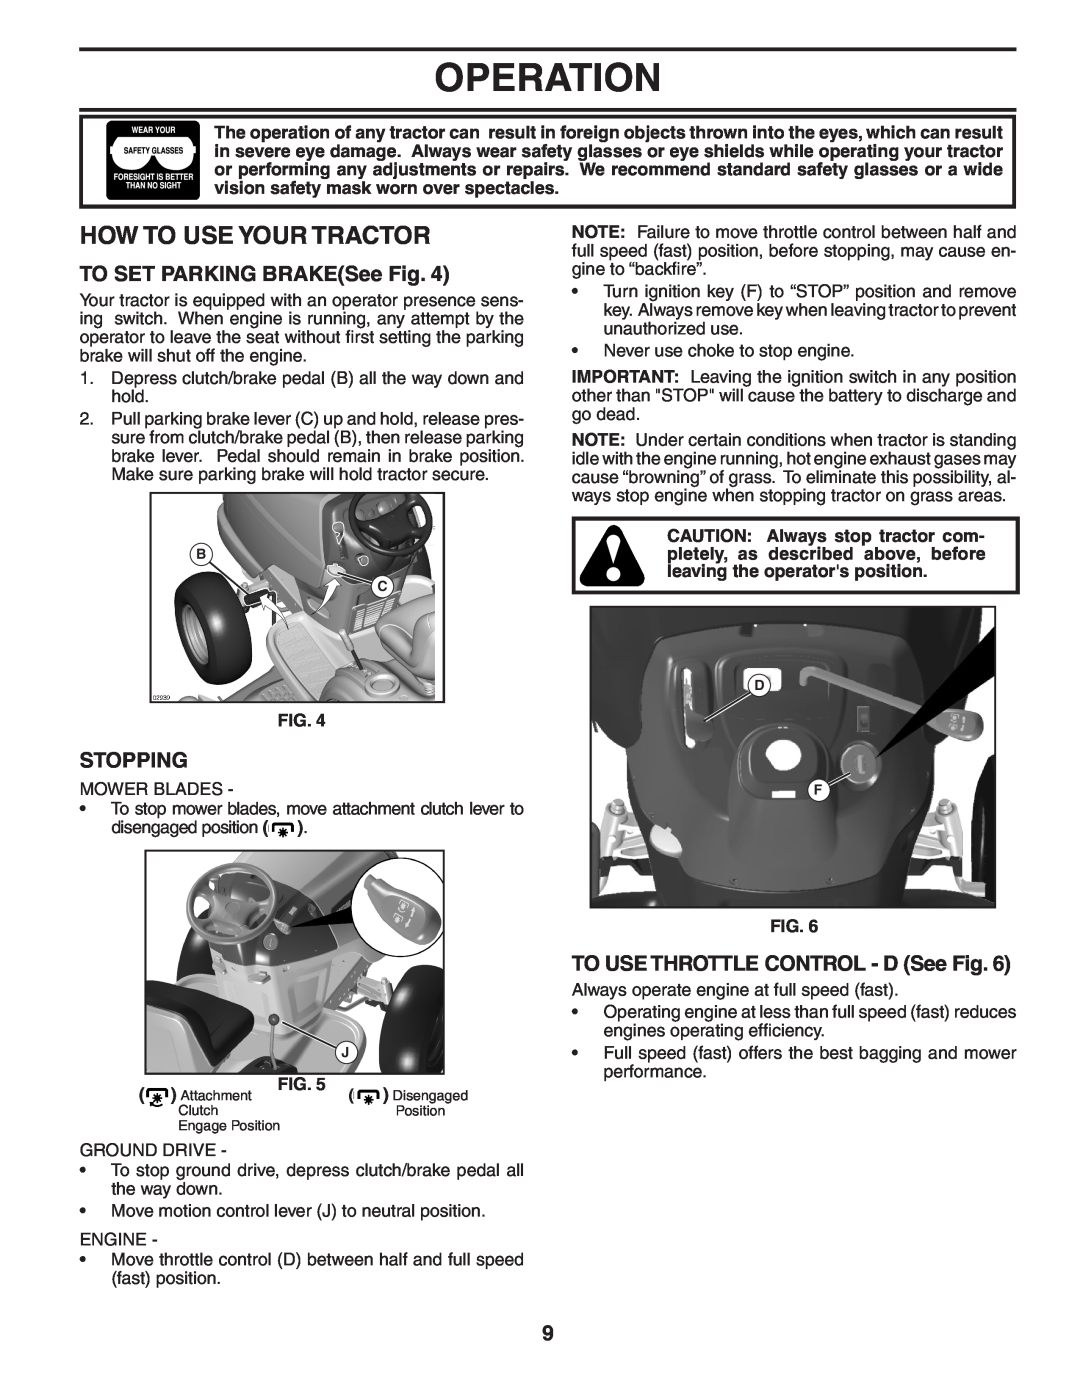 Poulan 402993 manual How To Use Your Tractor, TO SET PARKING BRAKESee Fig, Stopping, TO USE THROTTLE CONTROL - D See Fig 